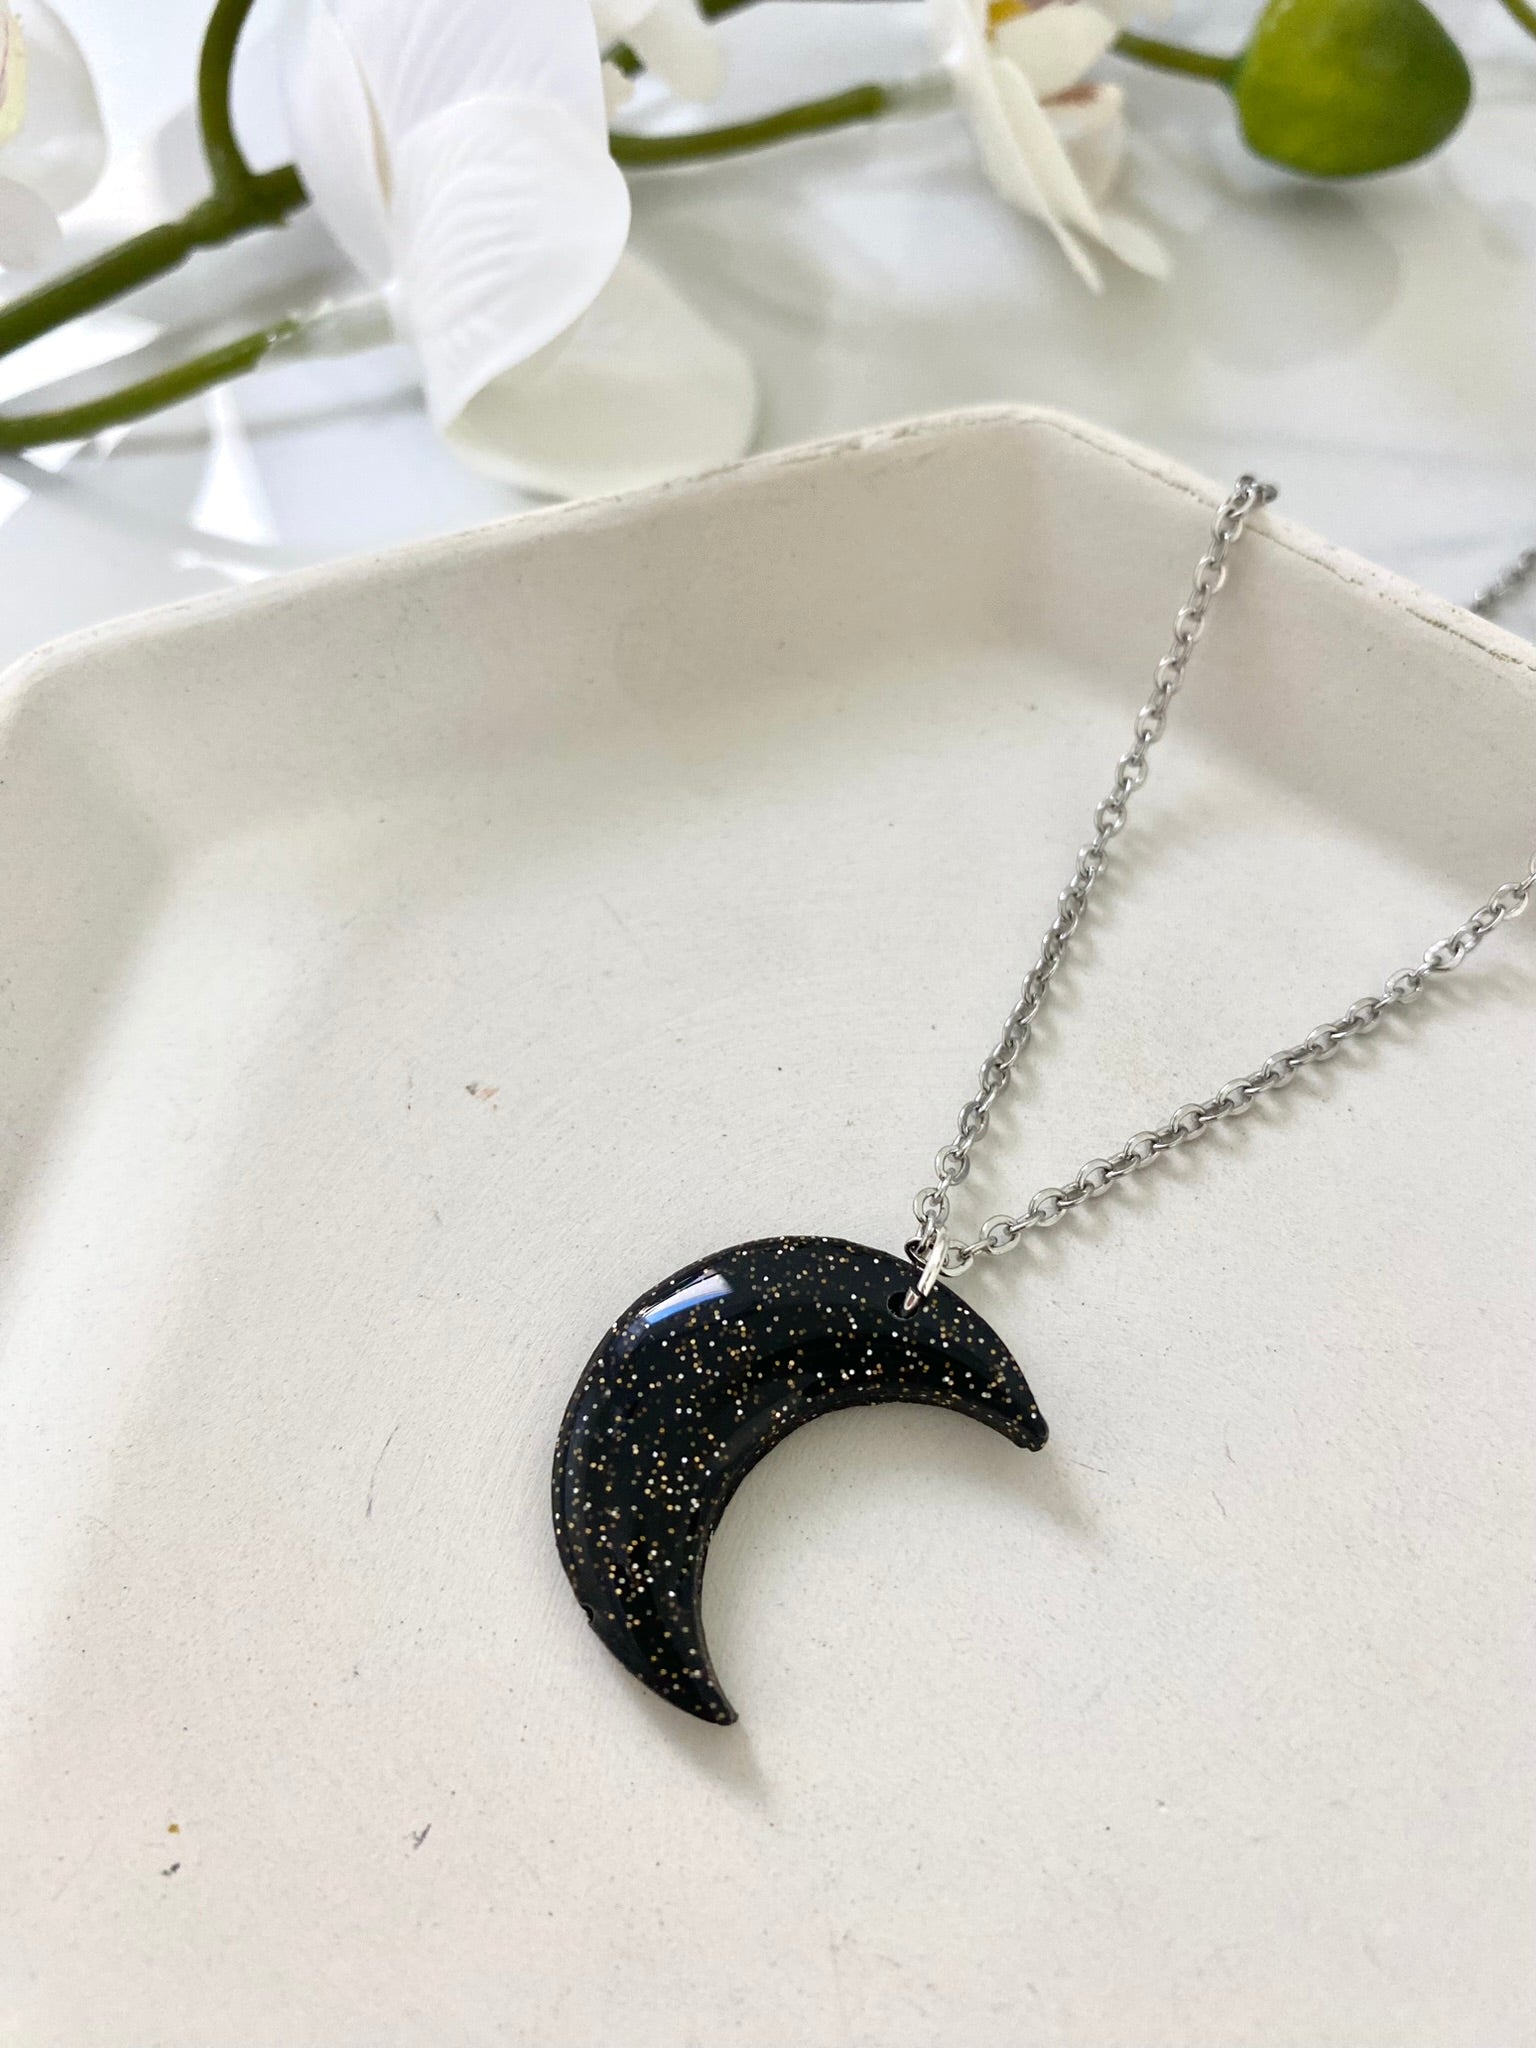 Cynthia Half Moon Necklace – Layer the Love